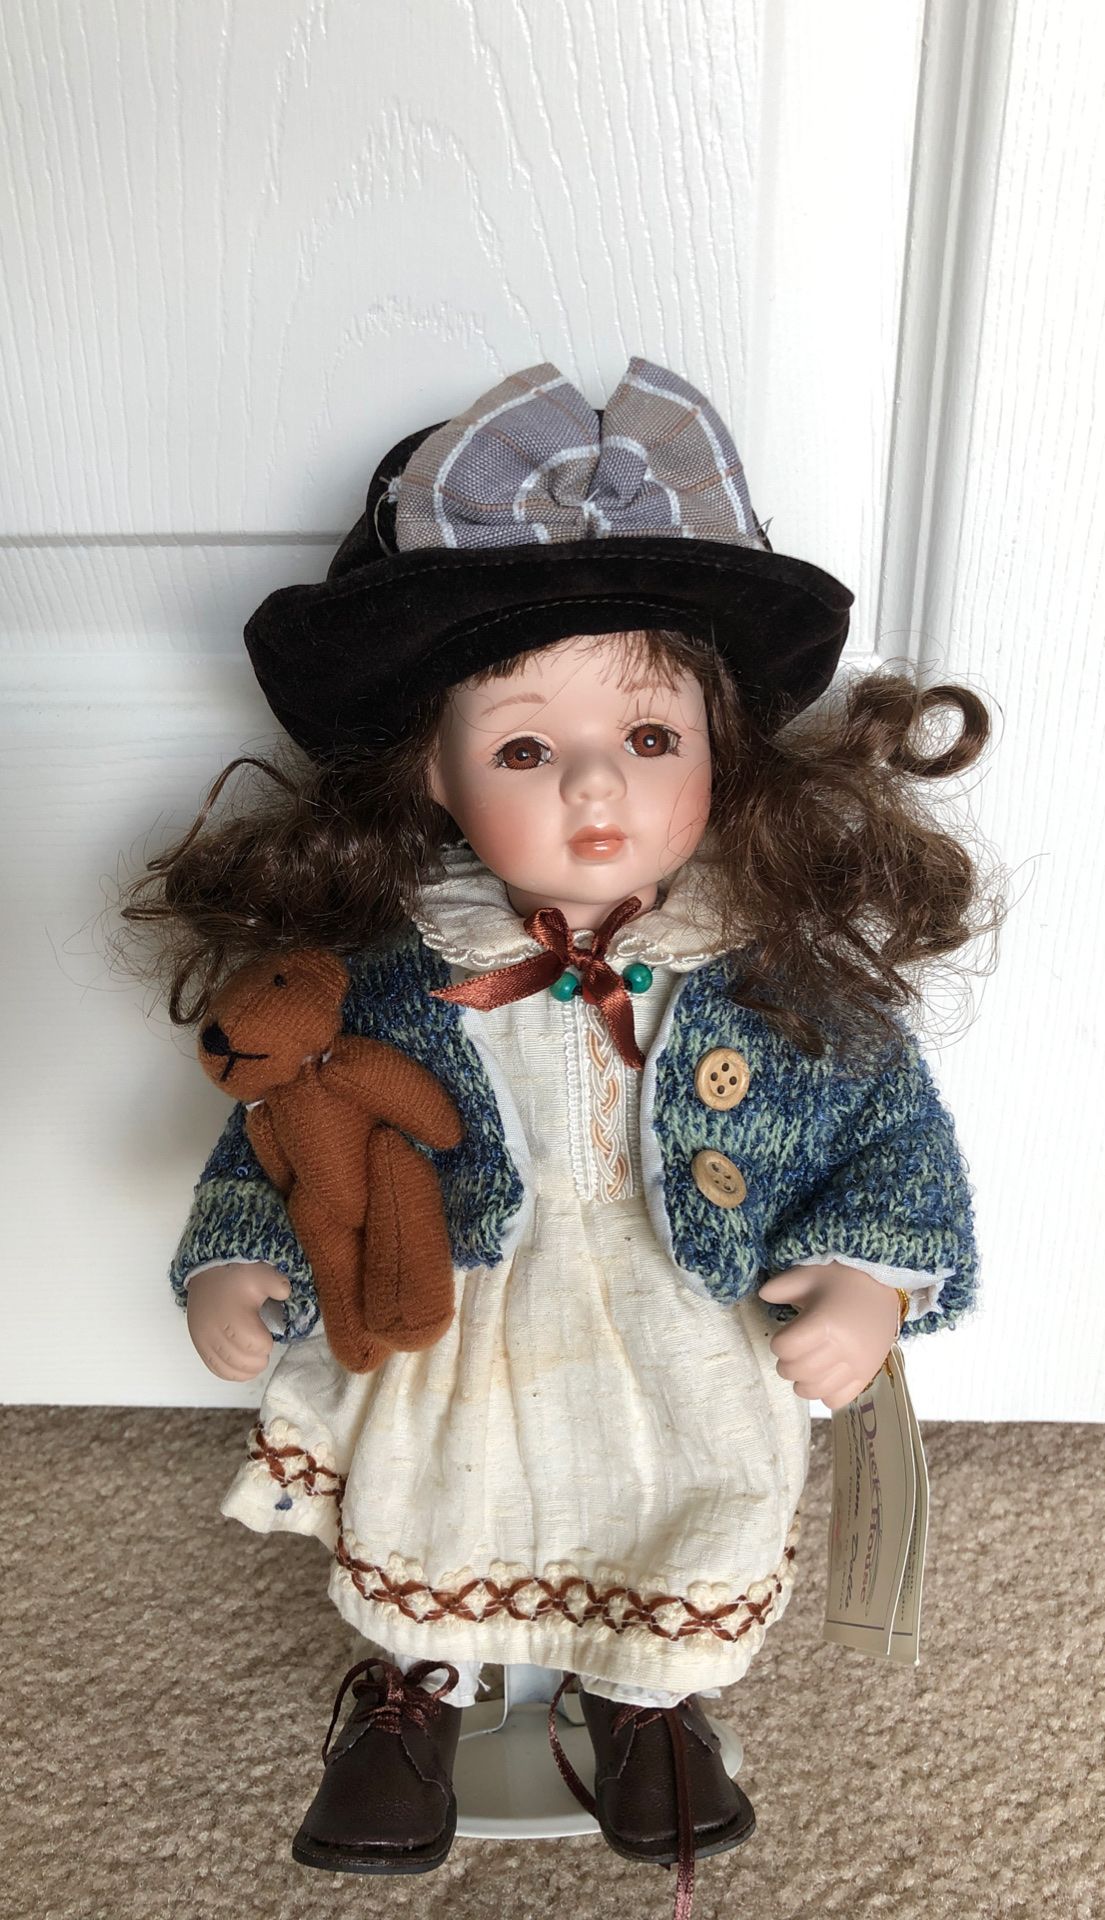 Porcelain Doll, Heirloom Edition from Duck House Dolls